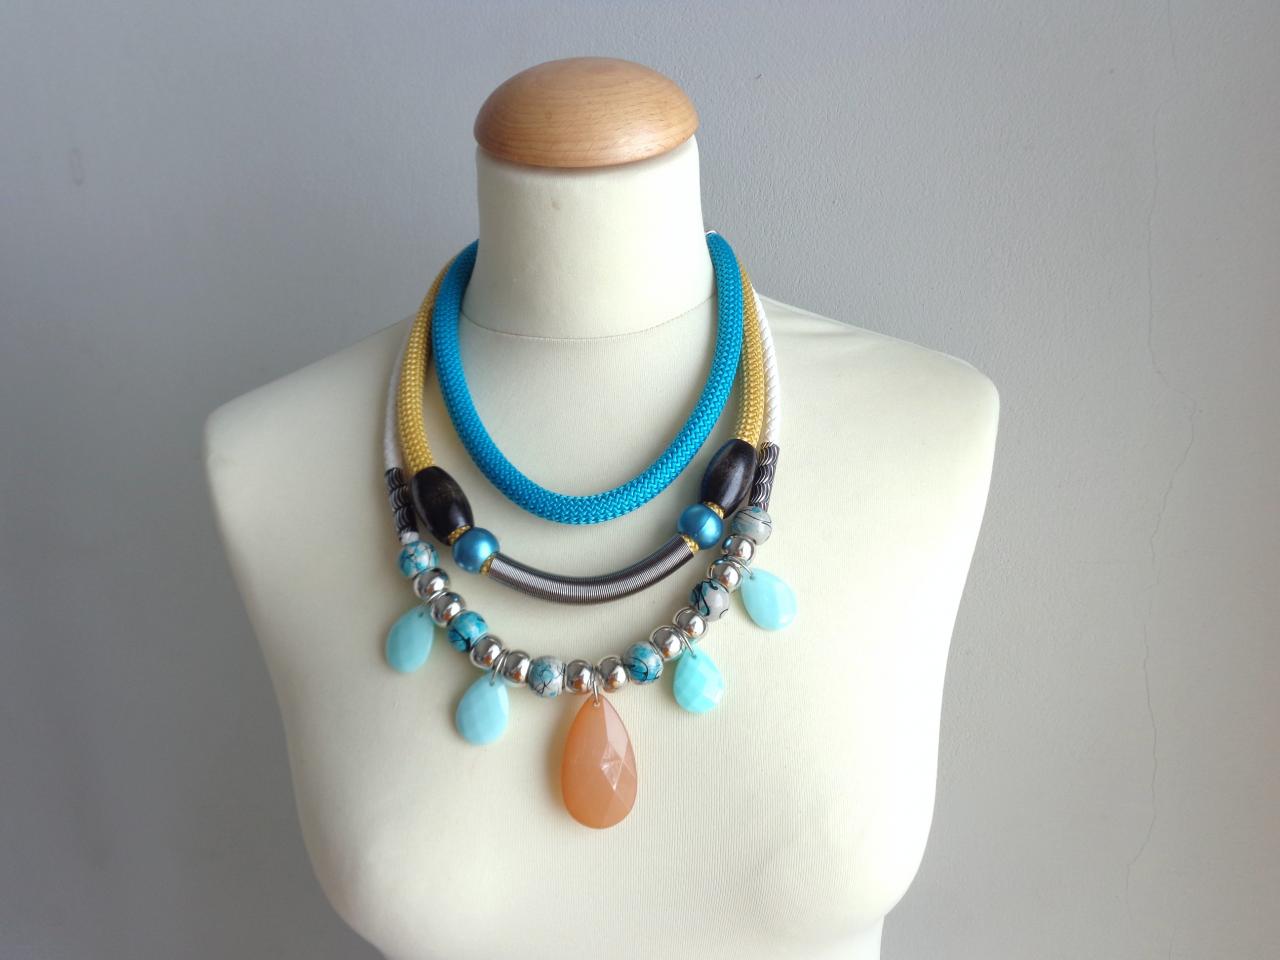 Tribal Statement Colorful Necklace Turquoise Black Mint Bronze